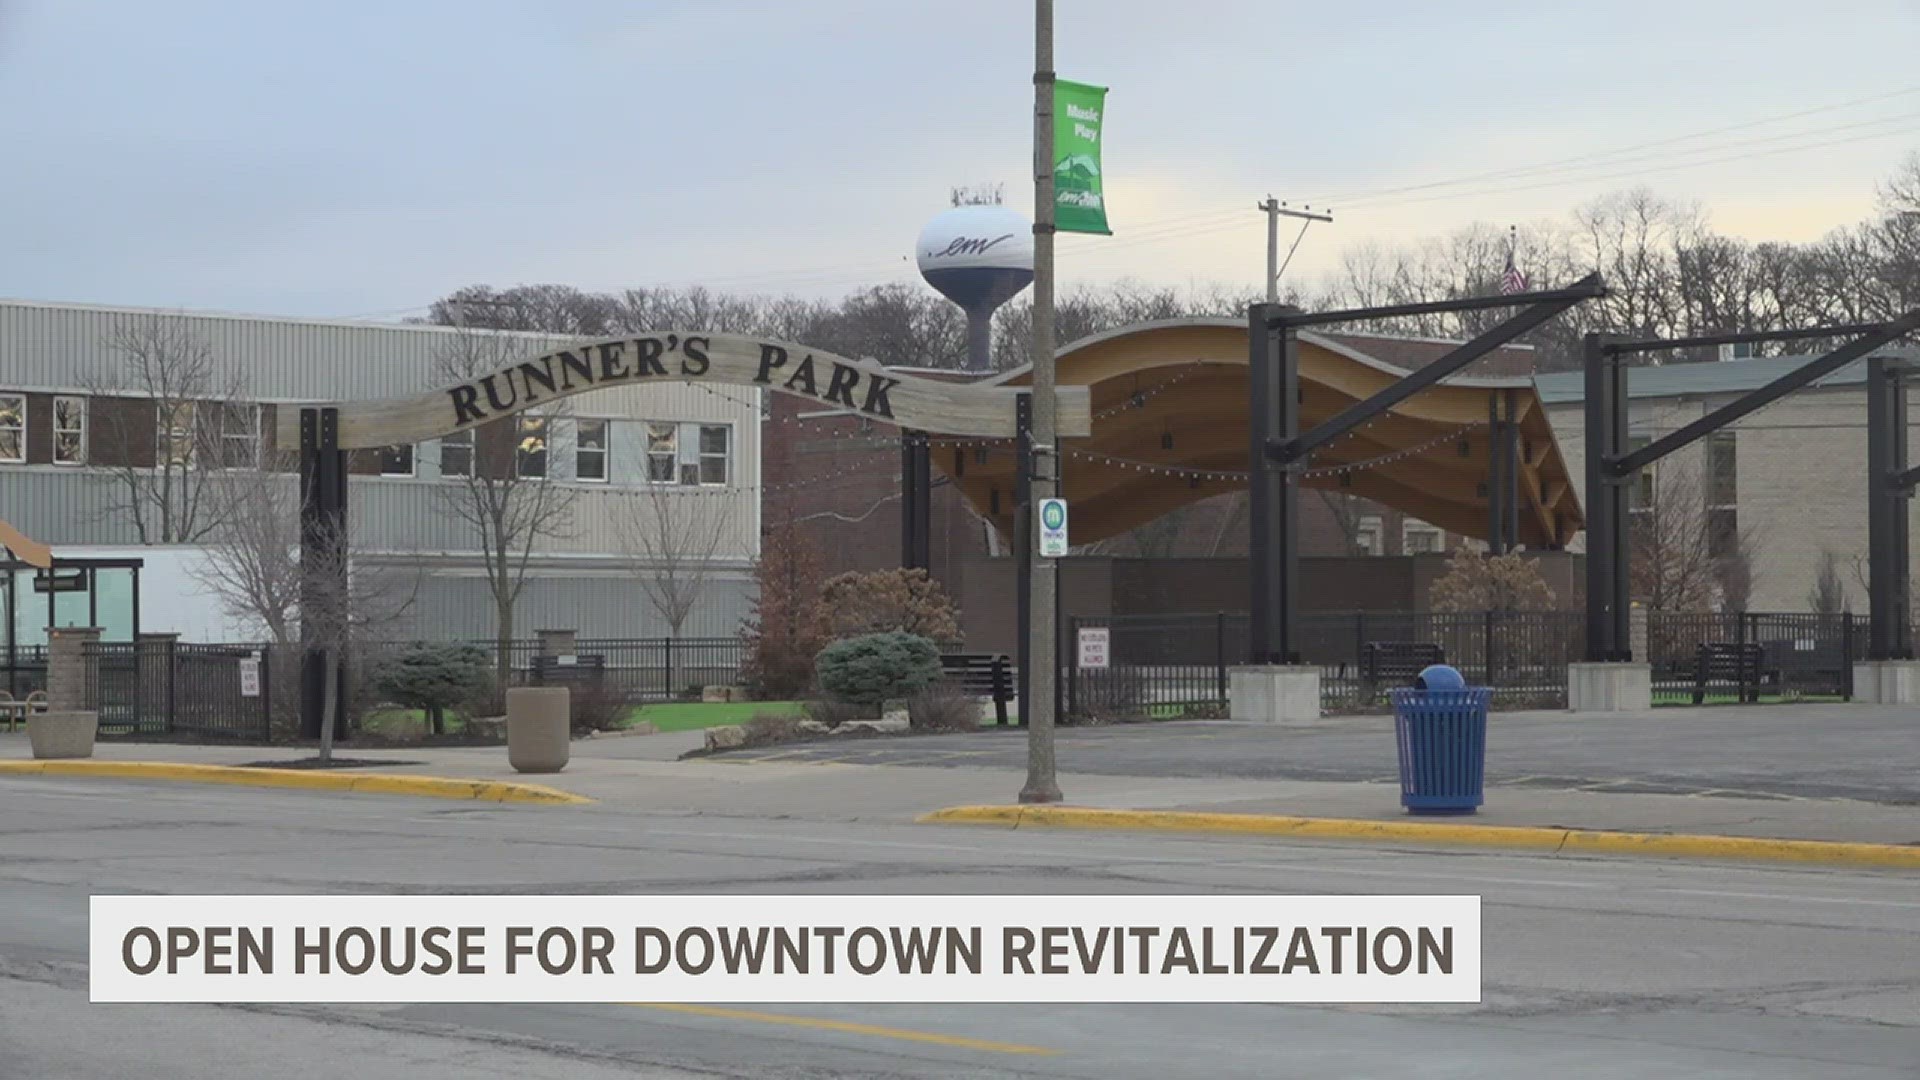 The extensive project is funded by a $24 million federal grant and looks to connect key areas of downtown.